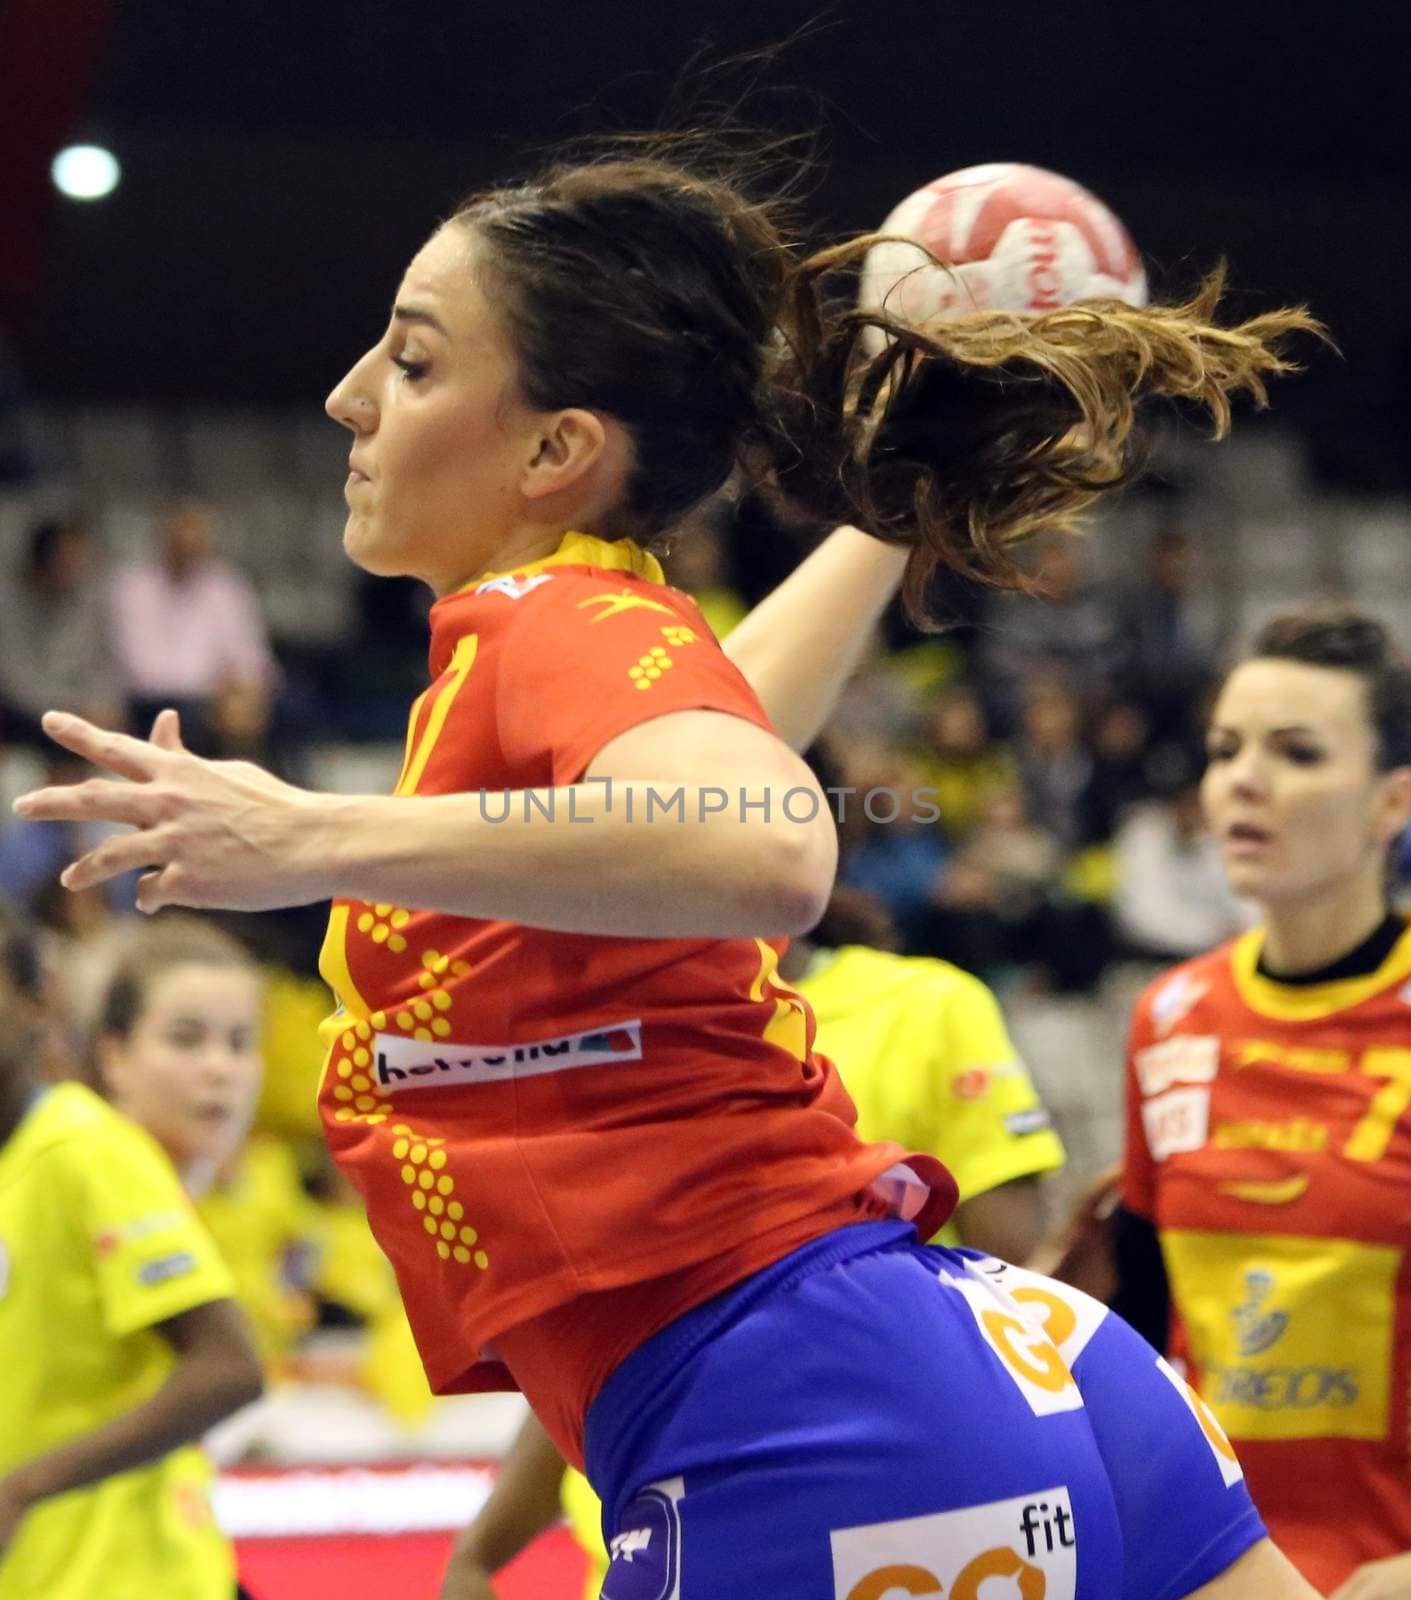 SPAIN, Gijon: A Spanish handballer prepares to launch the ball during the game against Angola on November 27, 2015 at the Torneo Internacional de Espa�a in Gijon, Spain. Spain would go on to win by a score of 37-27.